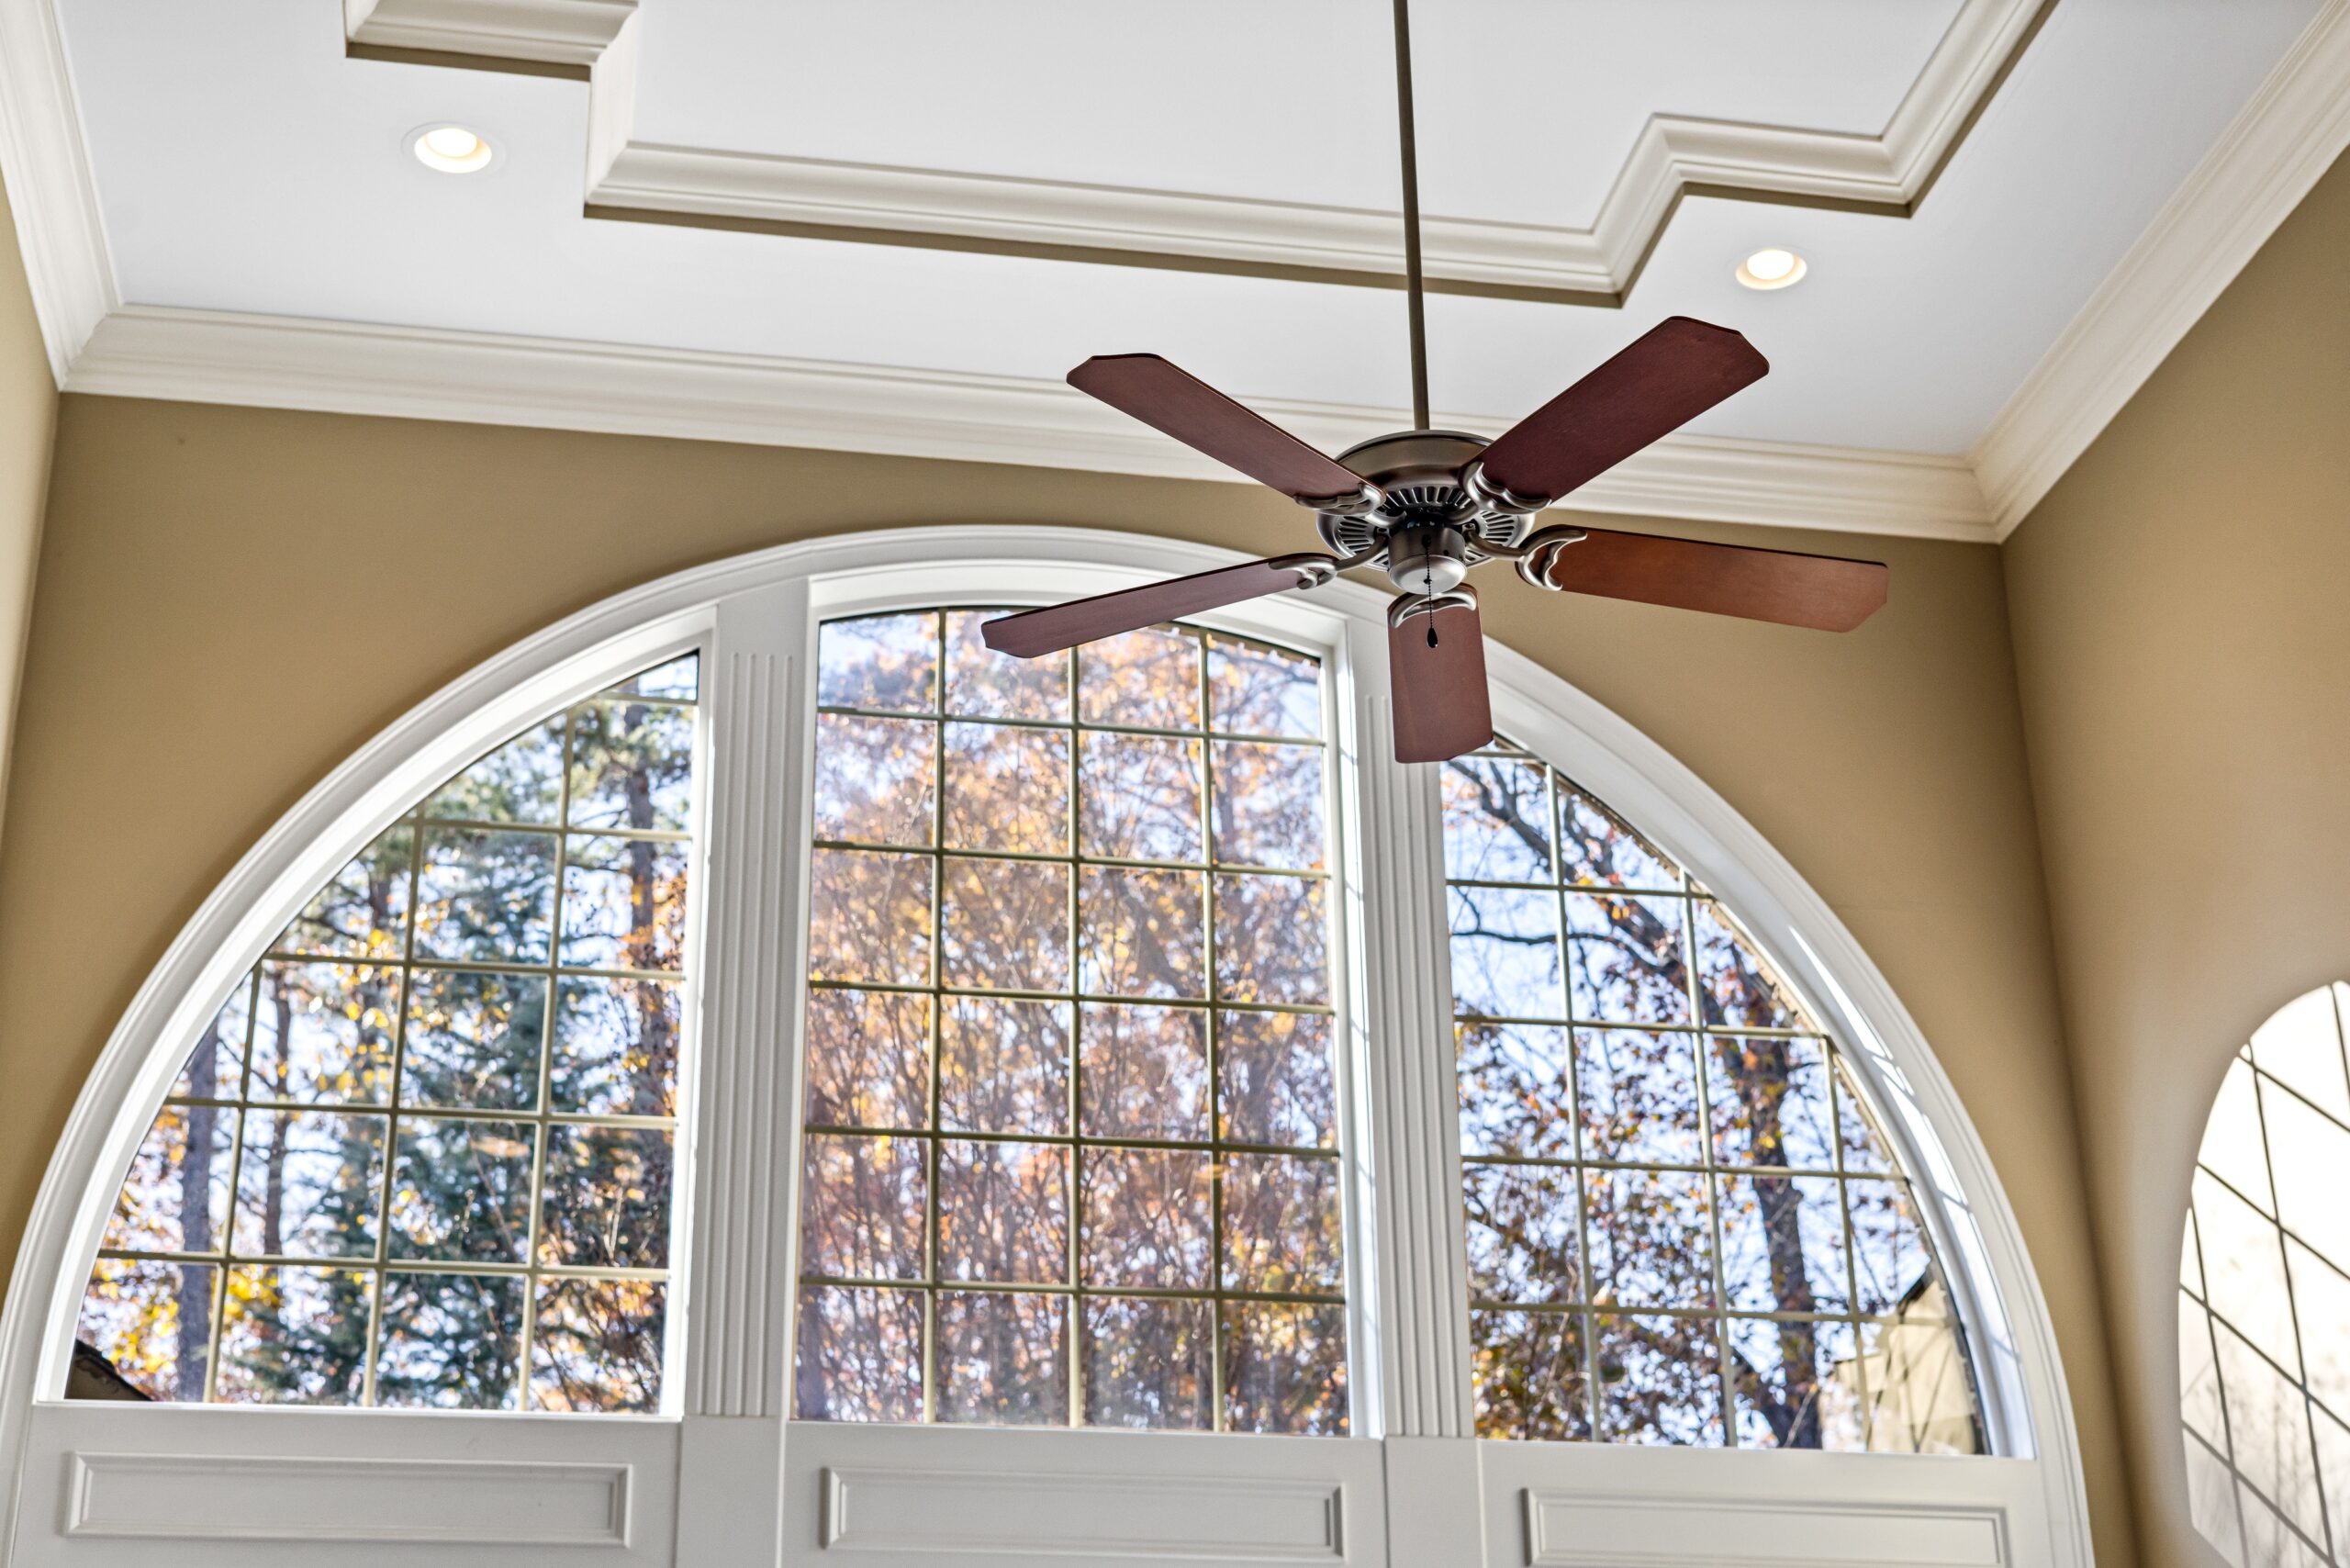 What is the best Ceiling Fan Height